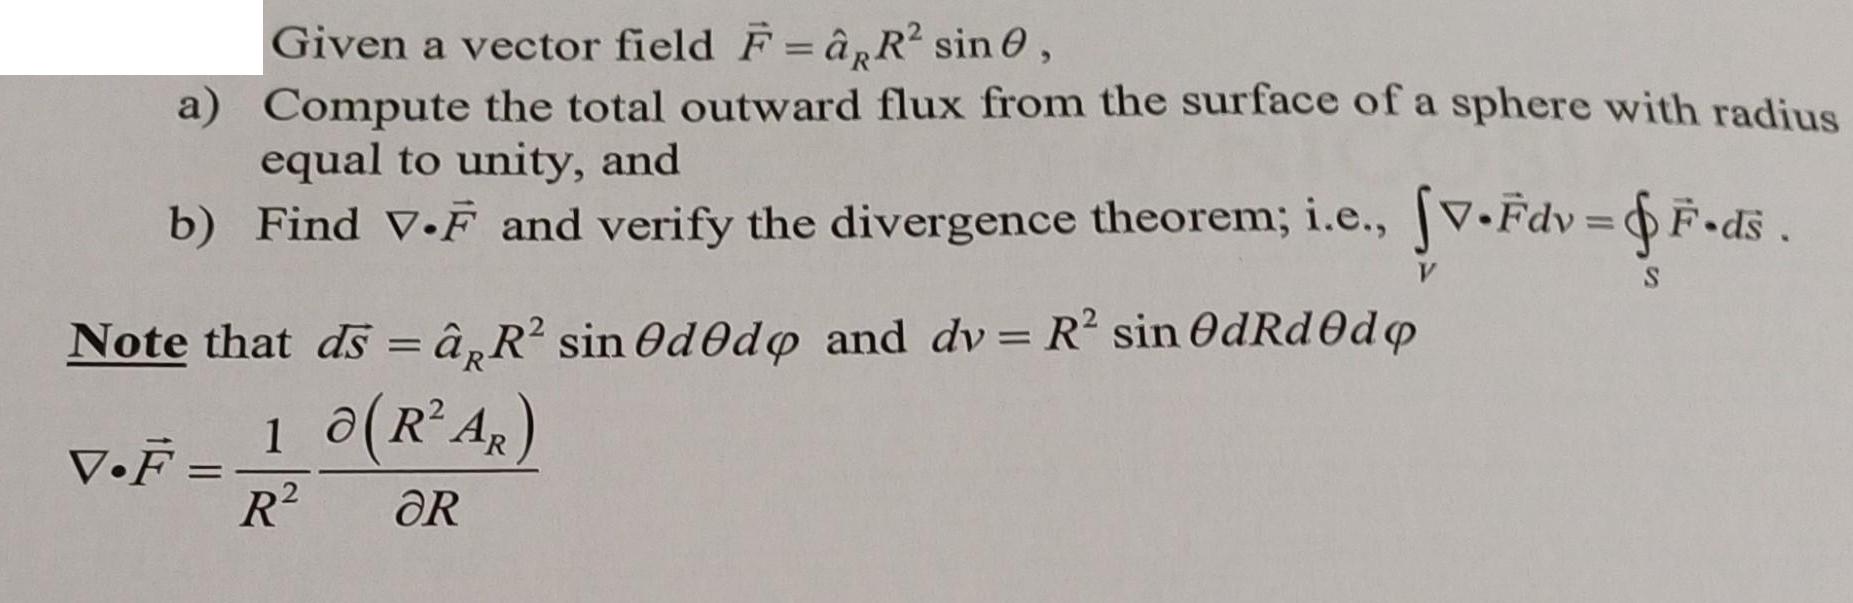 Given a vector field F=  R sin 0, a) Compute the total outward flux from the surface of a sphere with radius